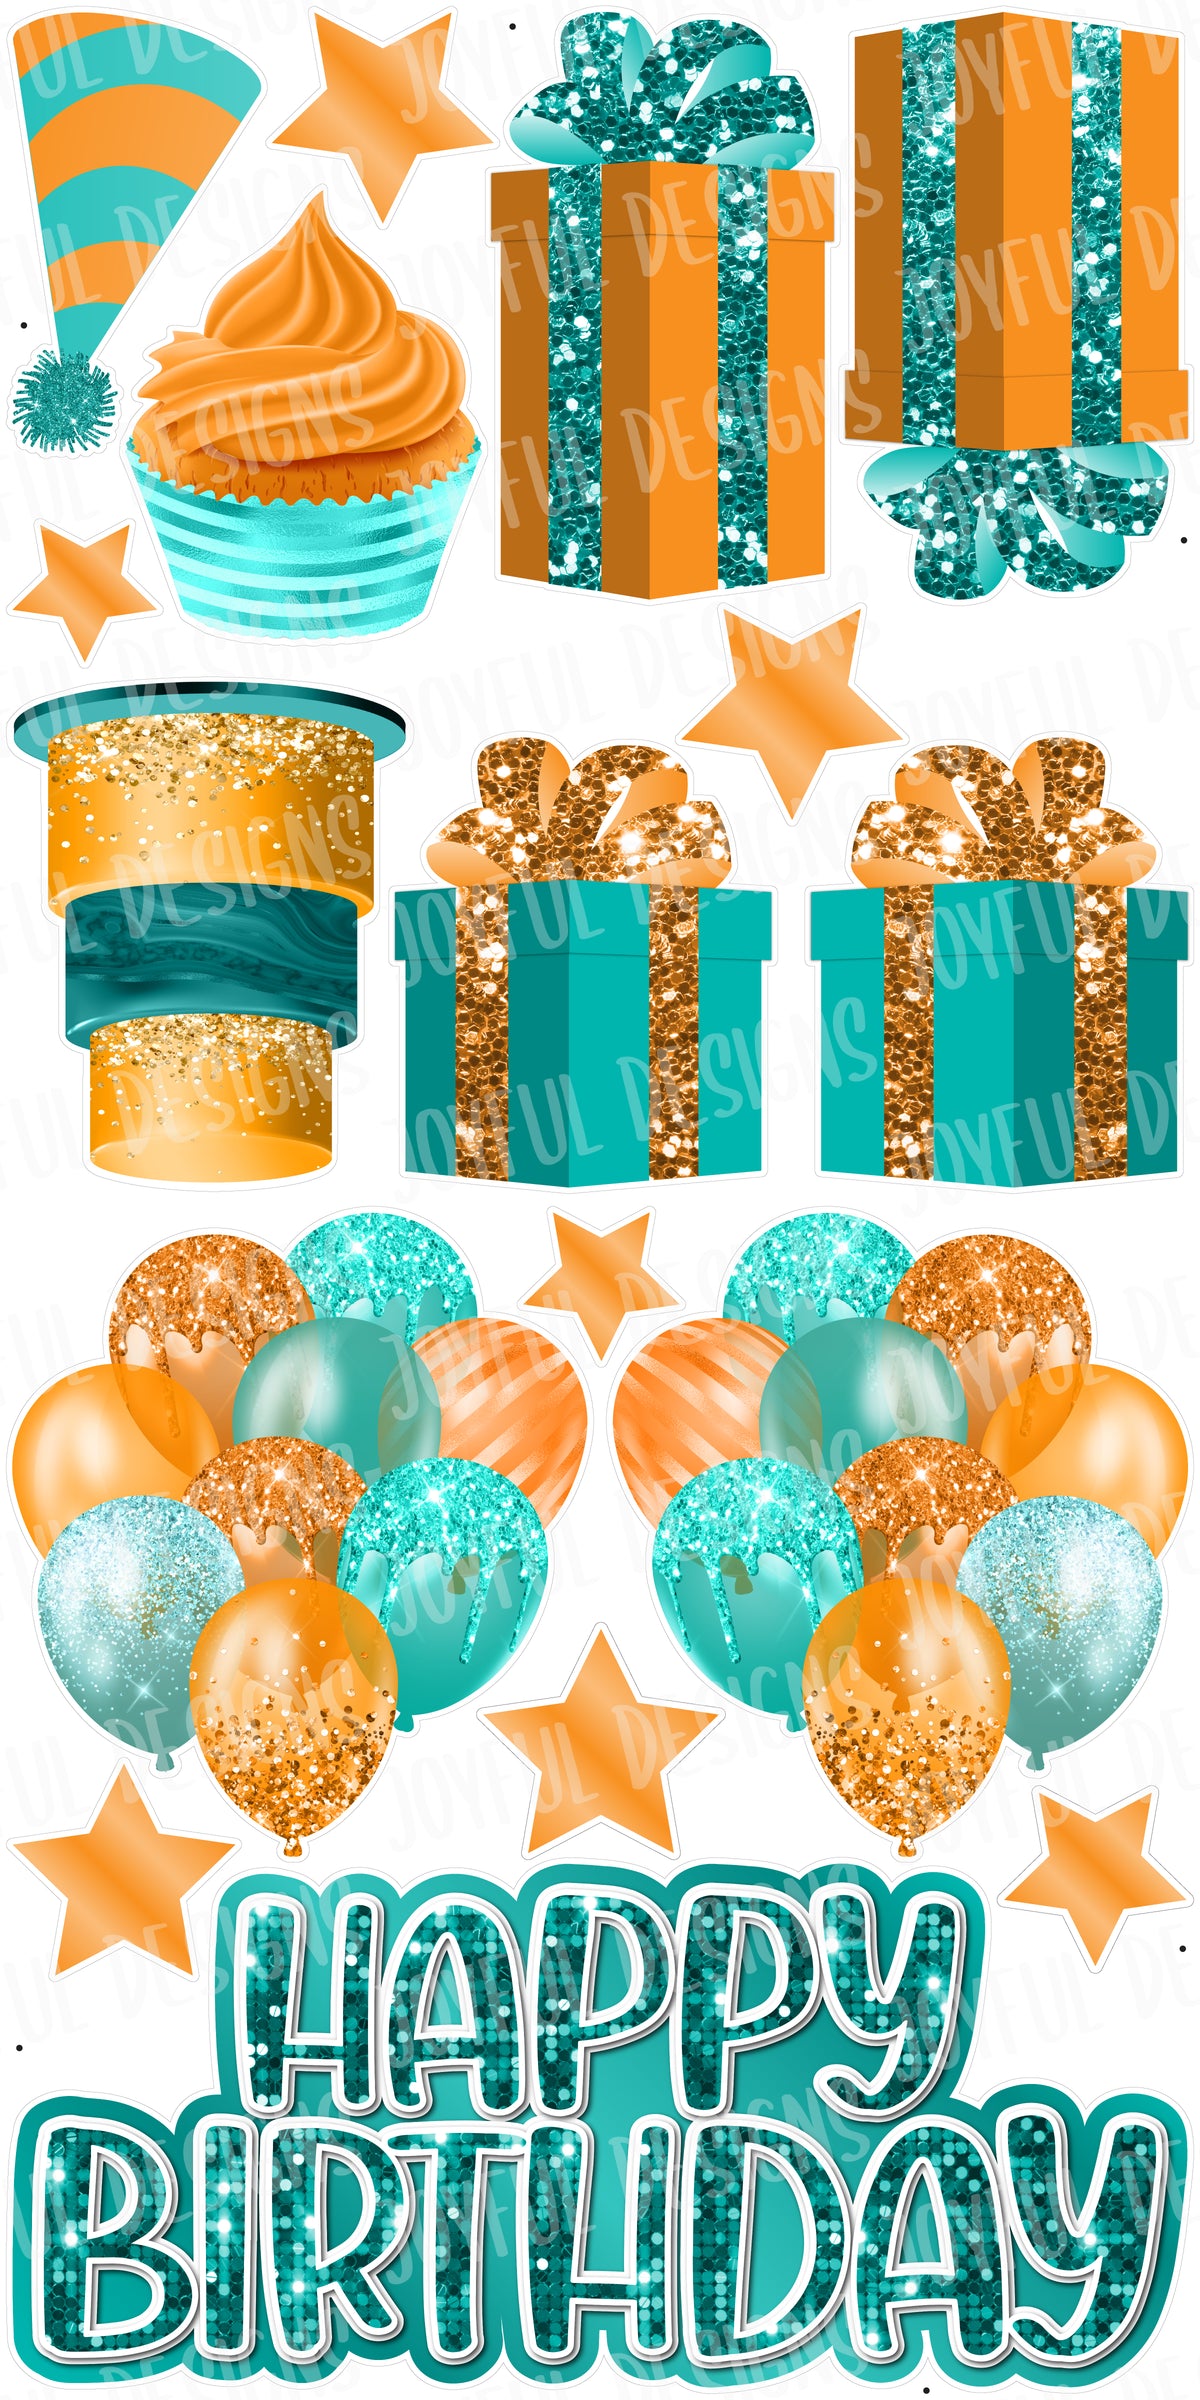 Orange and Teal "One and Done" Birthday Centerpiece and Flair - 2 Centerpiece Options